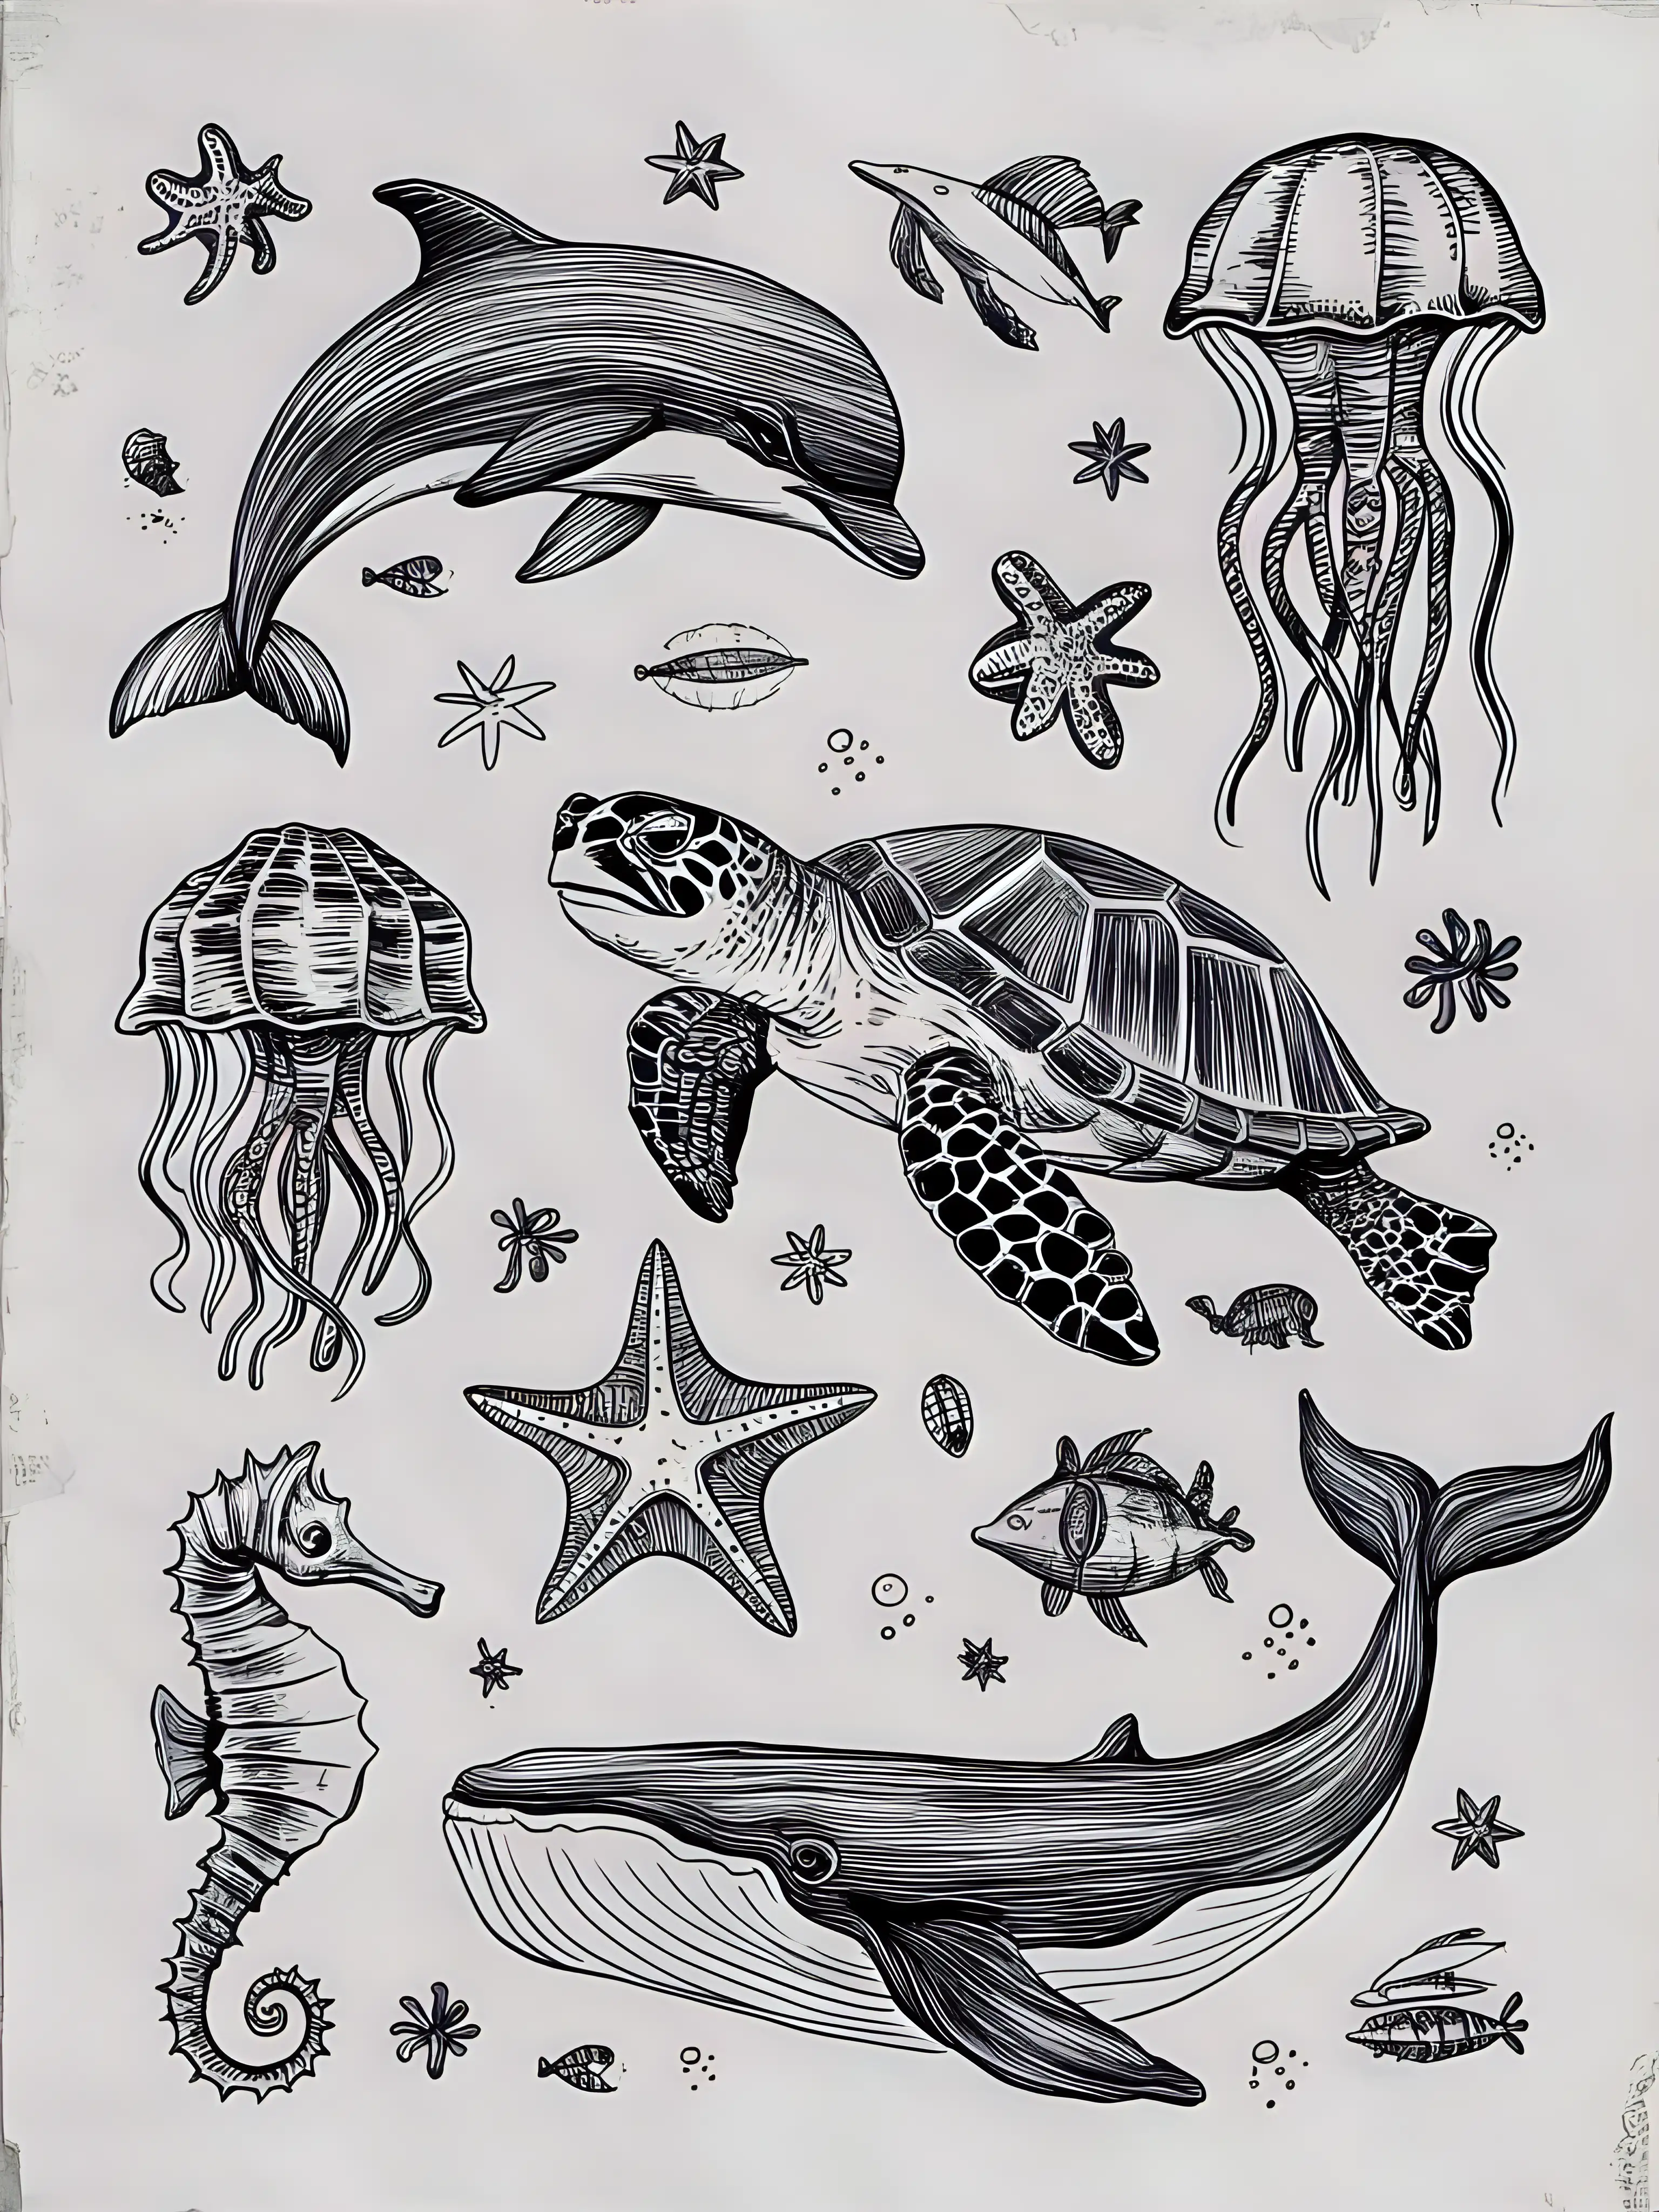 Vintage HandDrawn Collage of Various Sea Animals on White Background